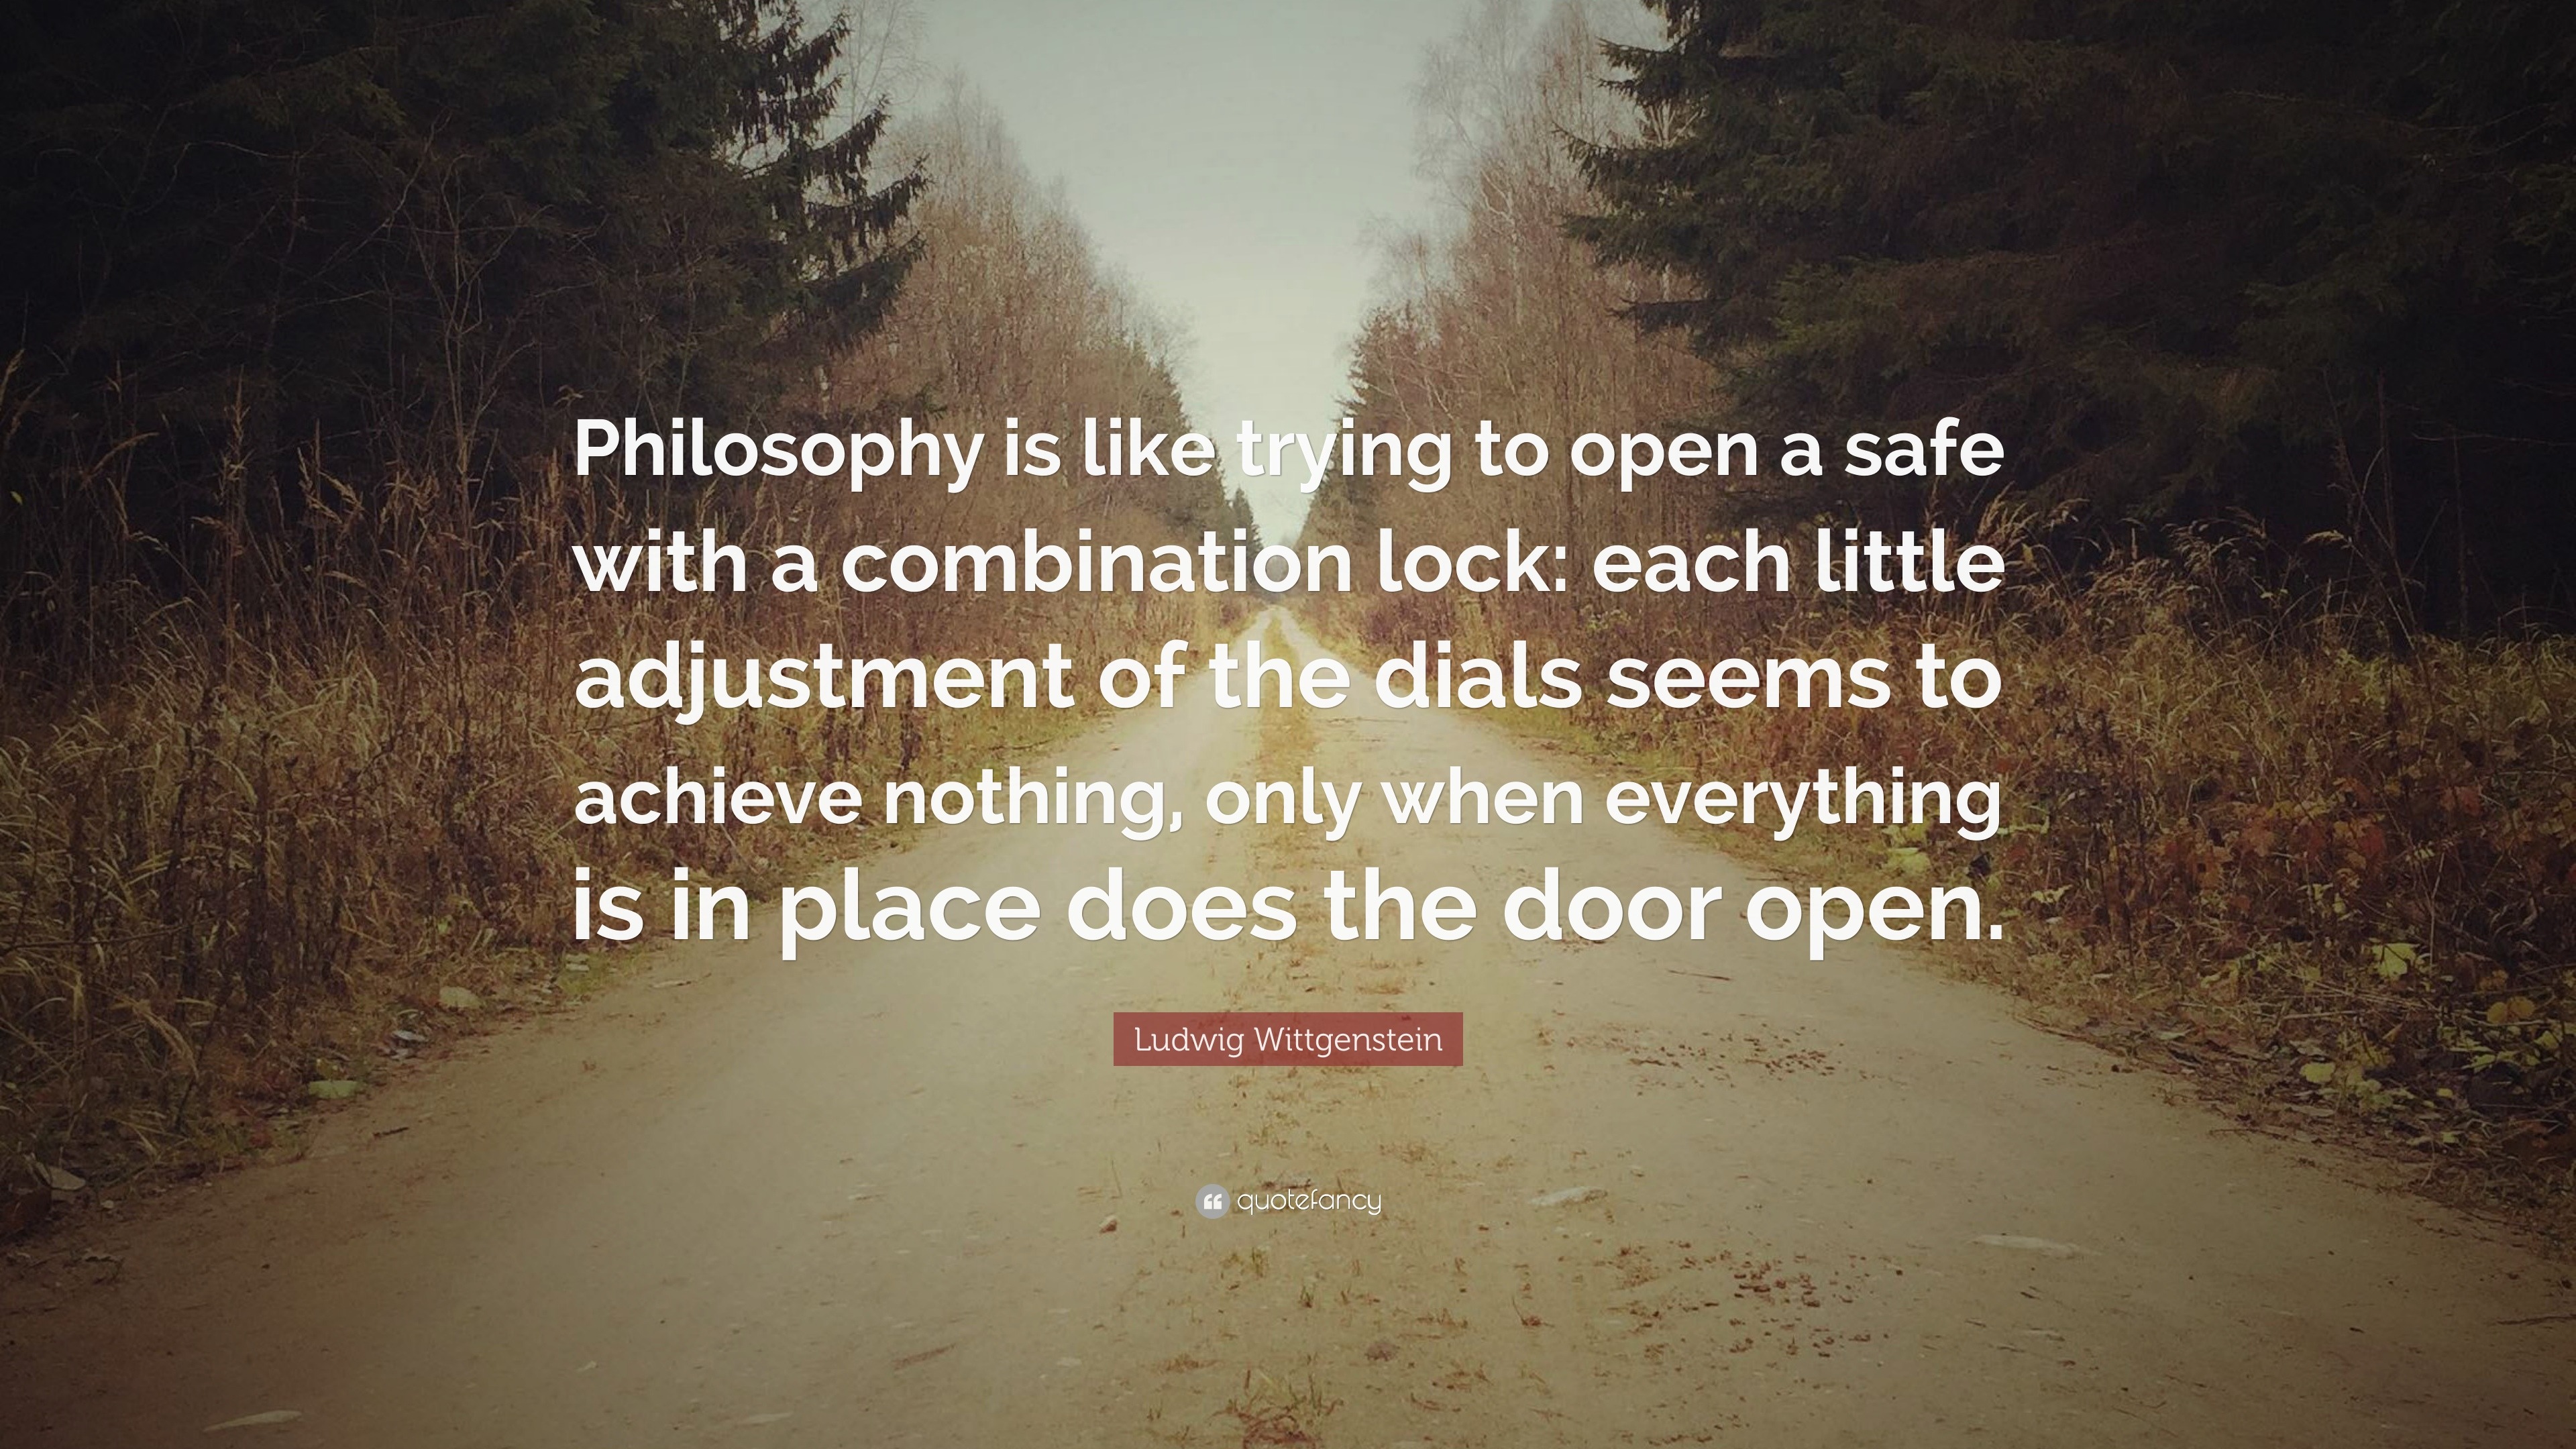 Ludwig Wittgenstein quote: Philosophy is like trying to open a